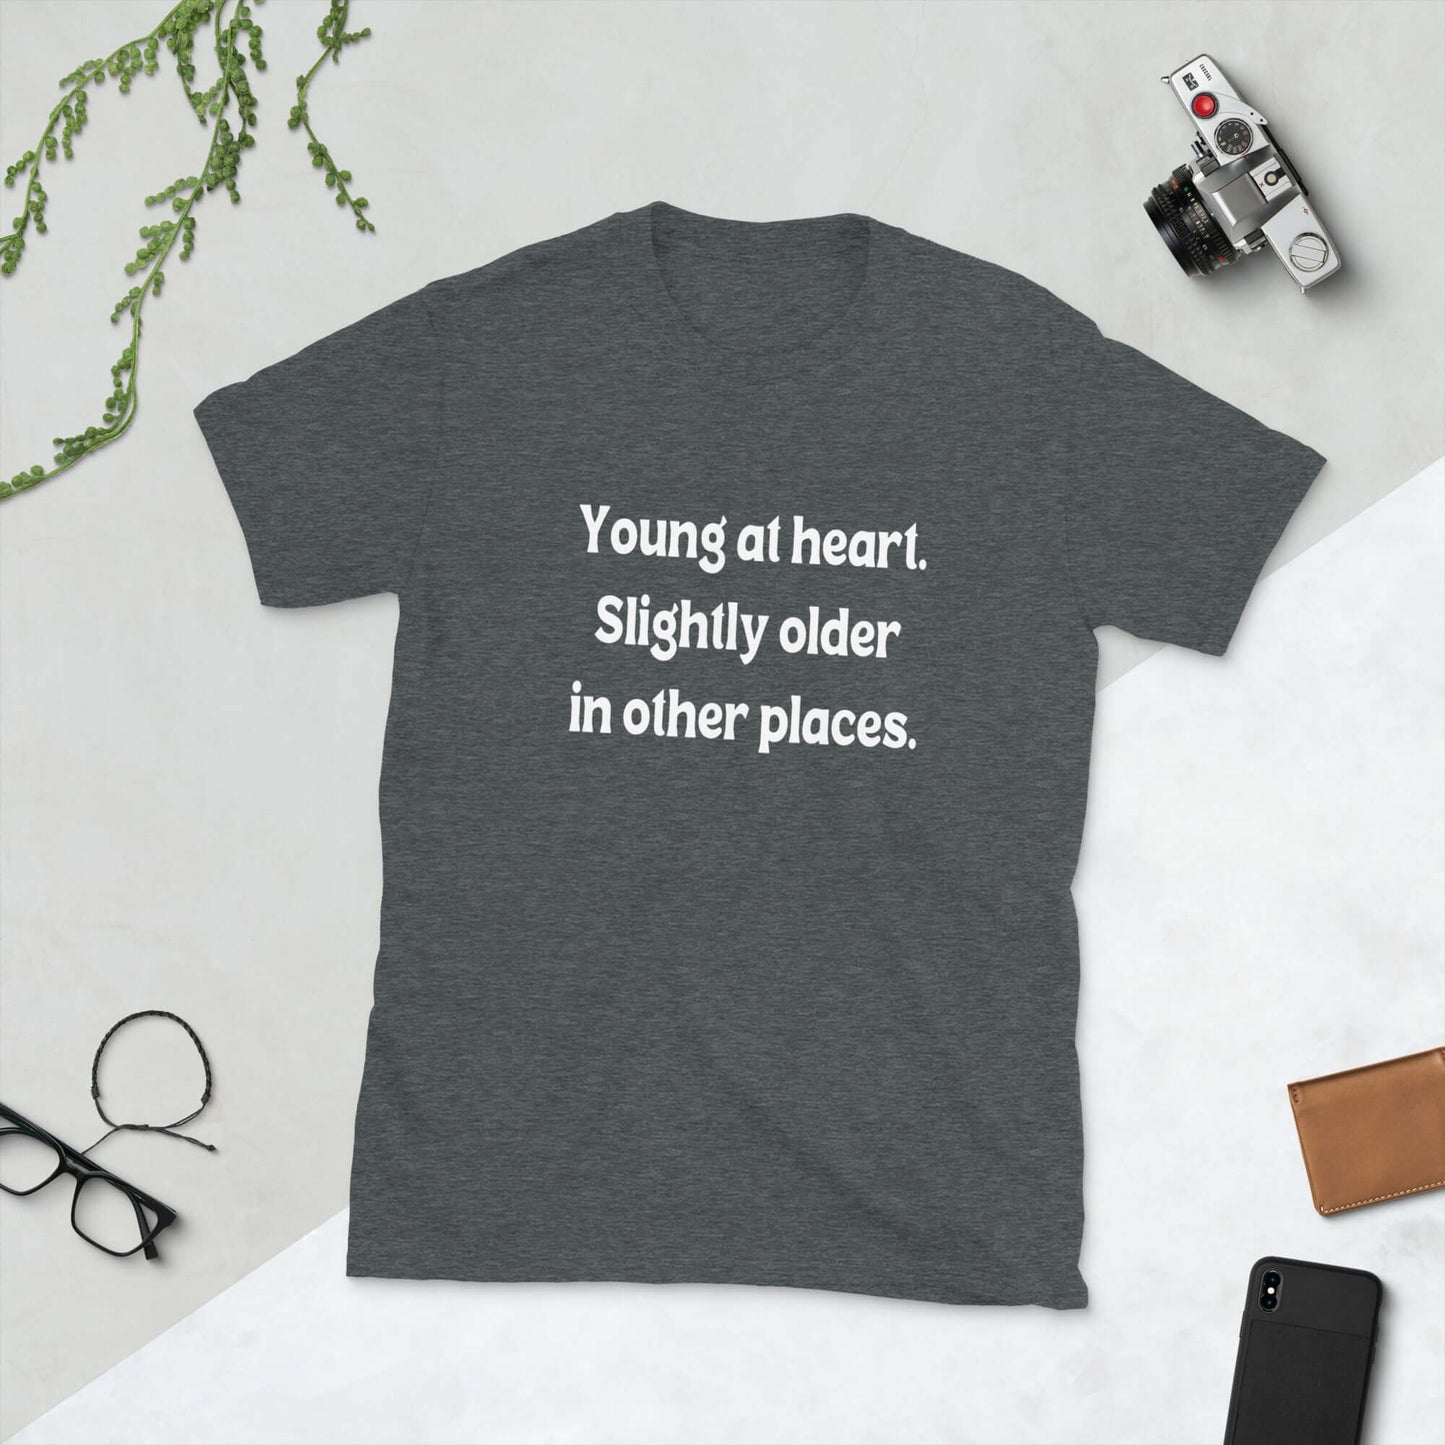 Young at heart funny t-shirt